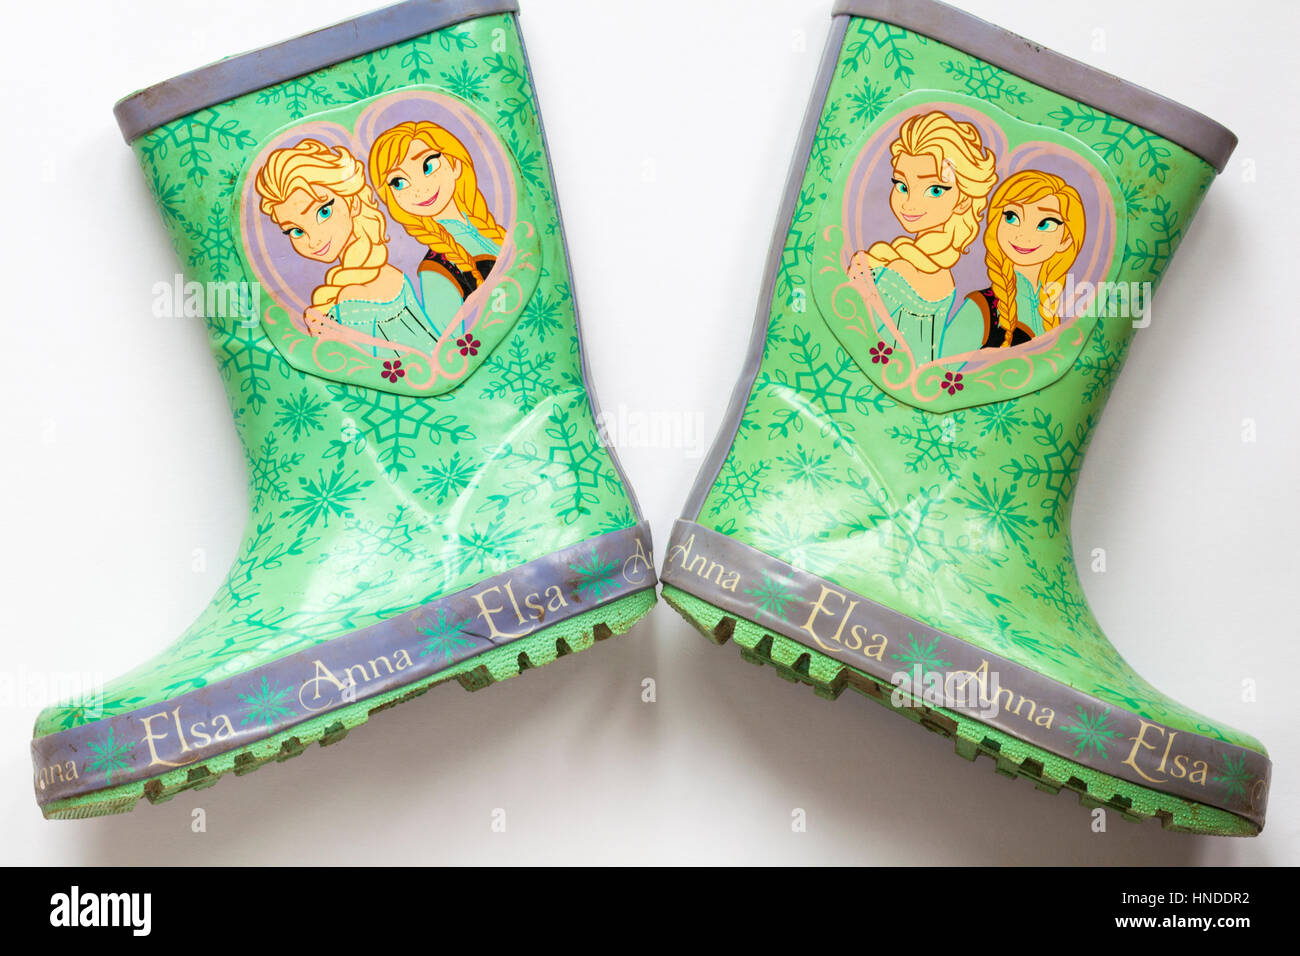 Well loved worn pair of children's wellie boots with Anna and Elsa from Frozen on set on white background Stock Photo